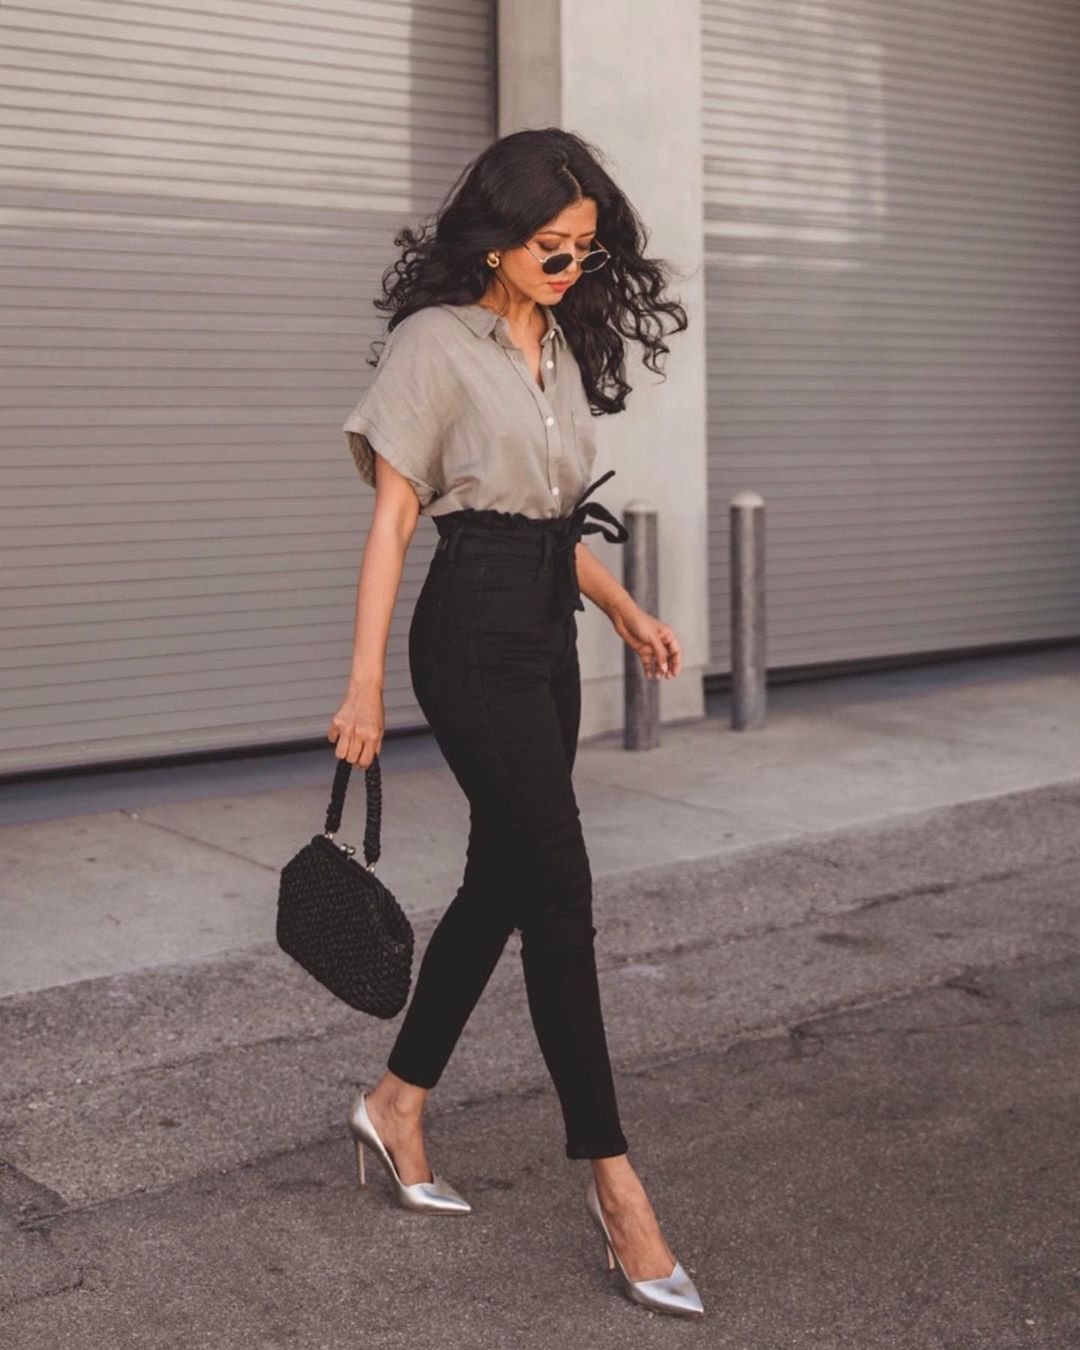 Tie-Waist Pants Are a Spring Trend That We Can?t Get Enough Of